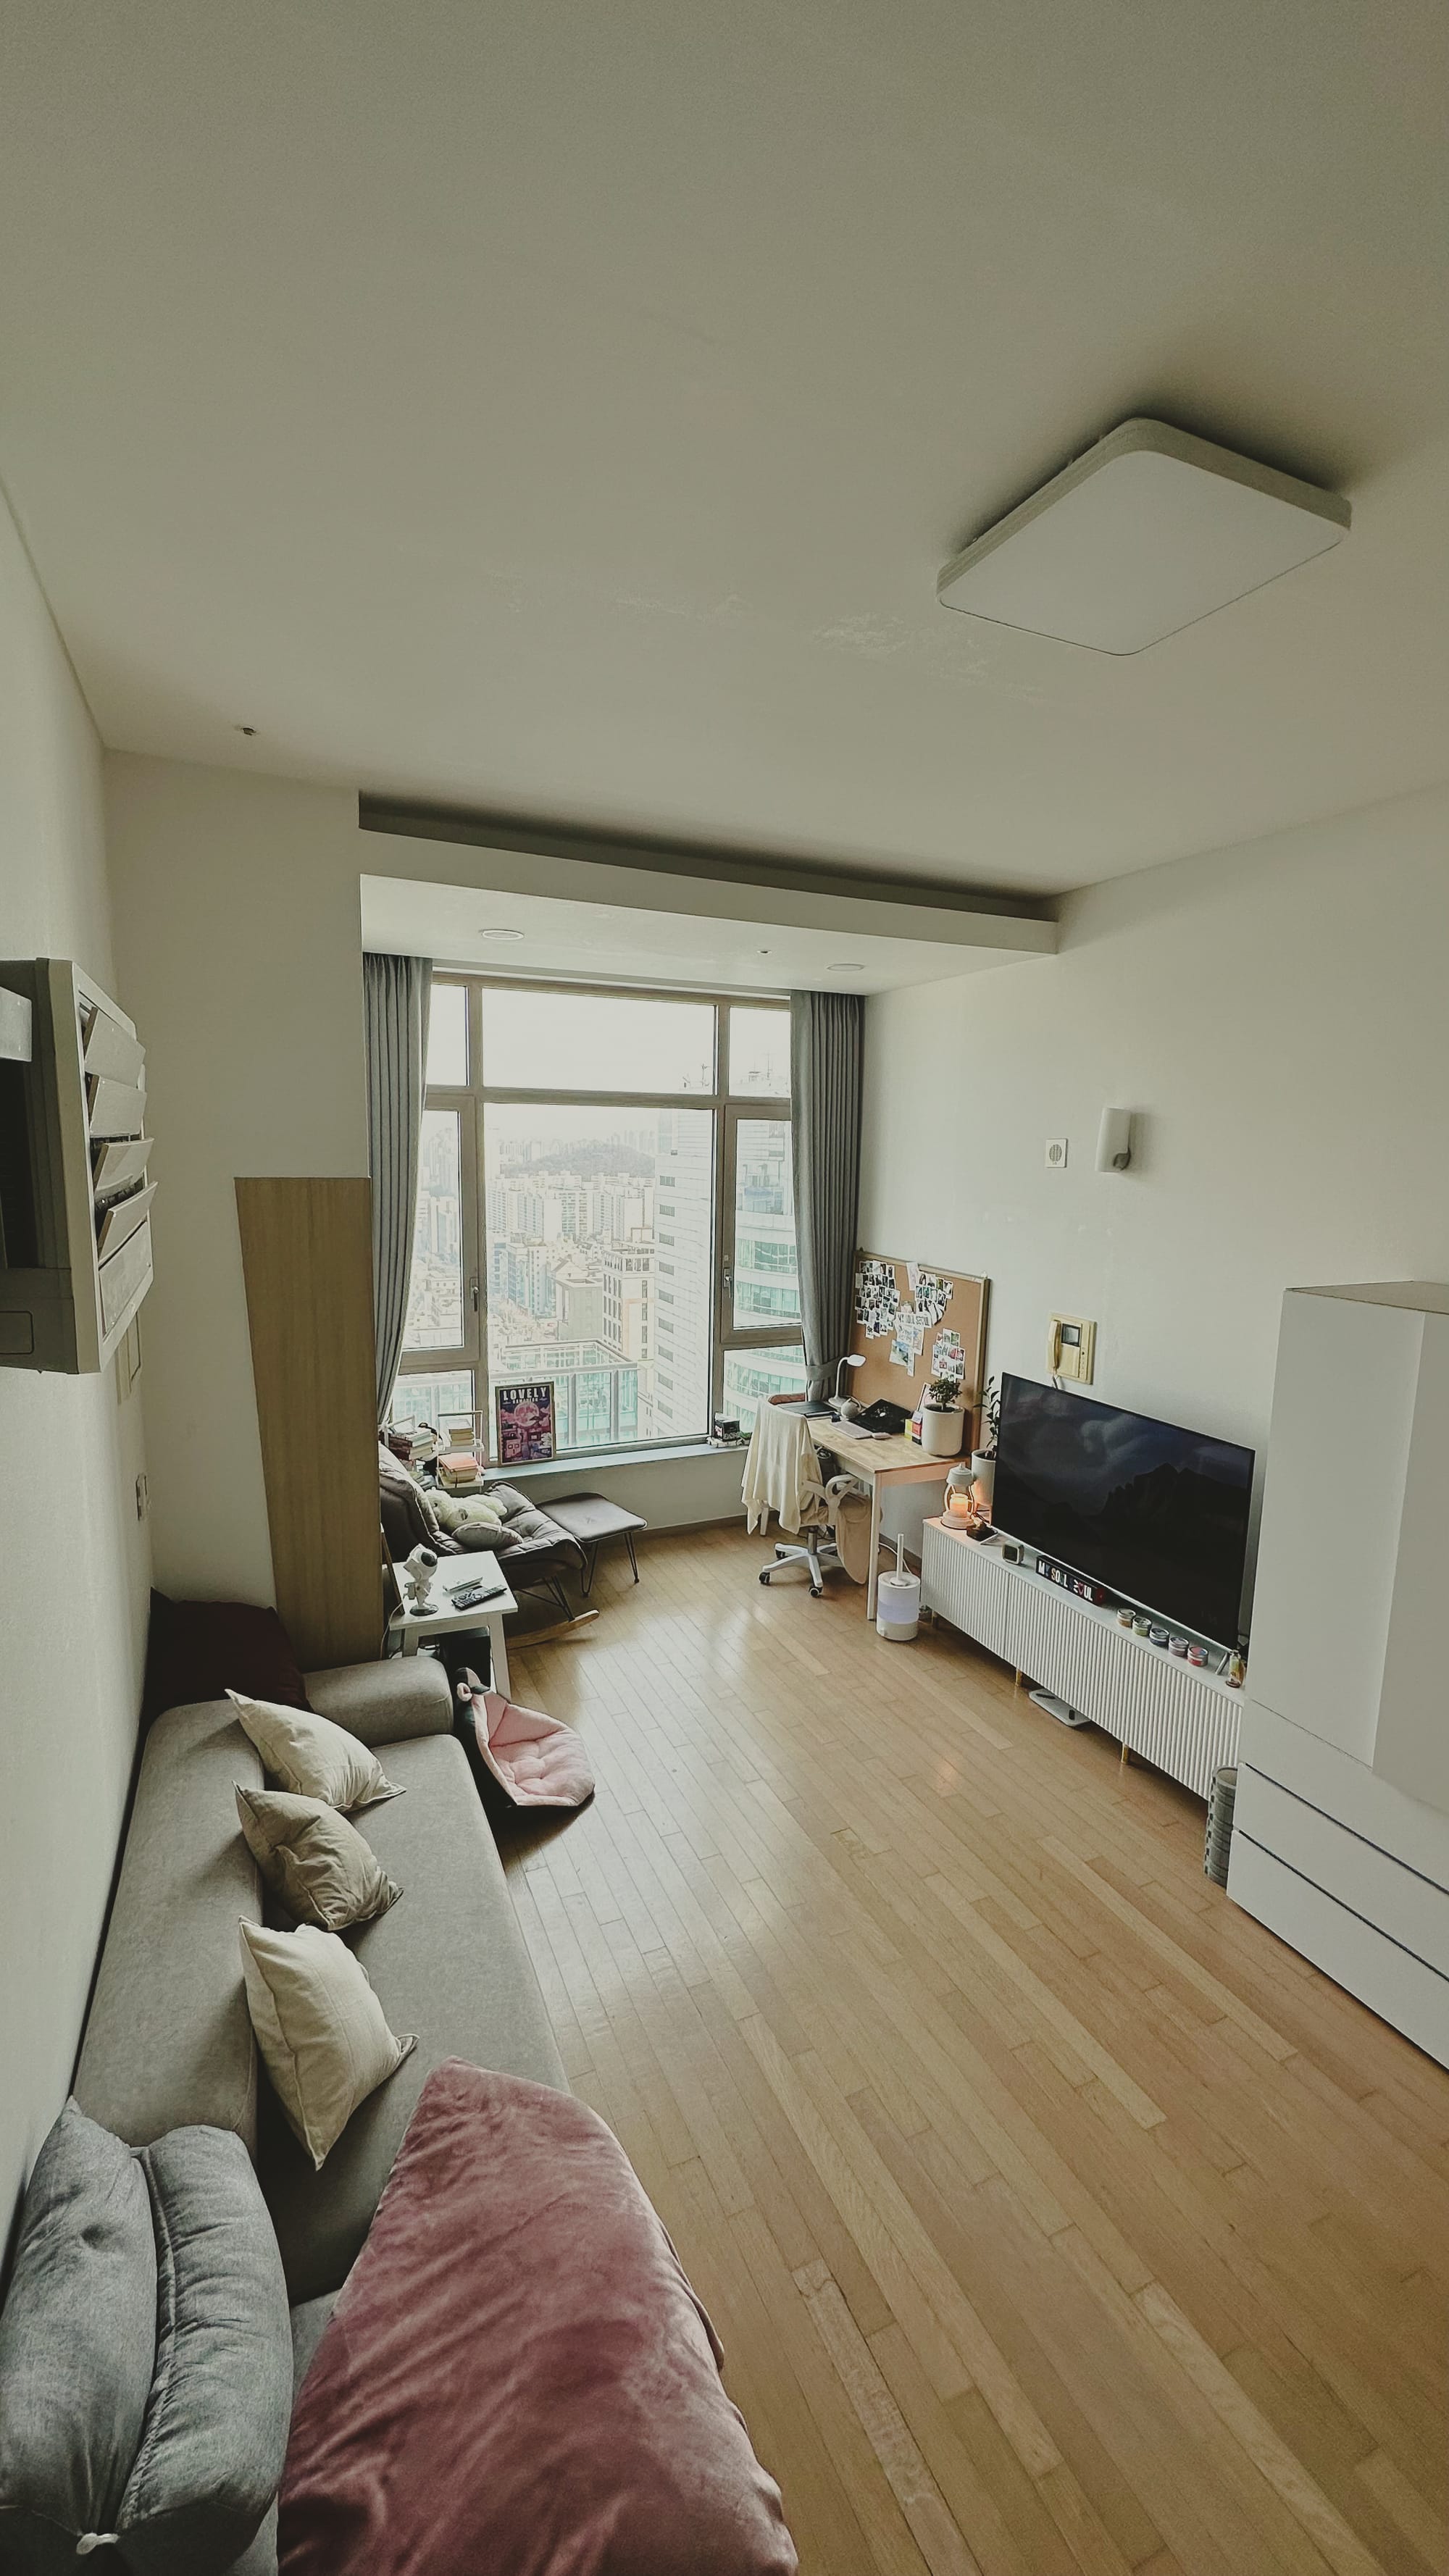 Seoul Housing 101: Where to Rent and How to Navigate the Market